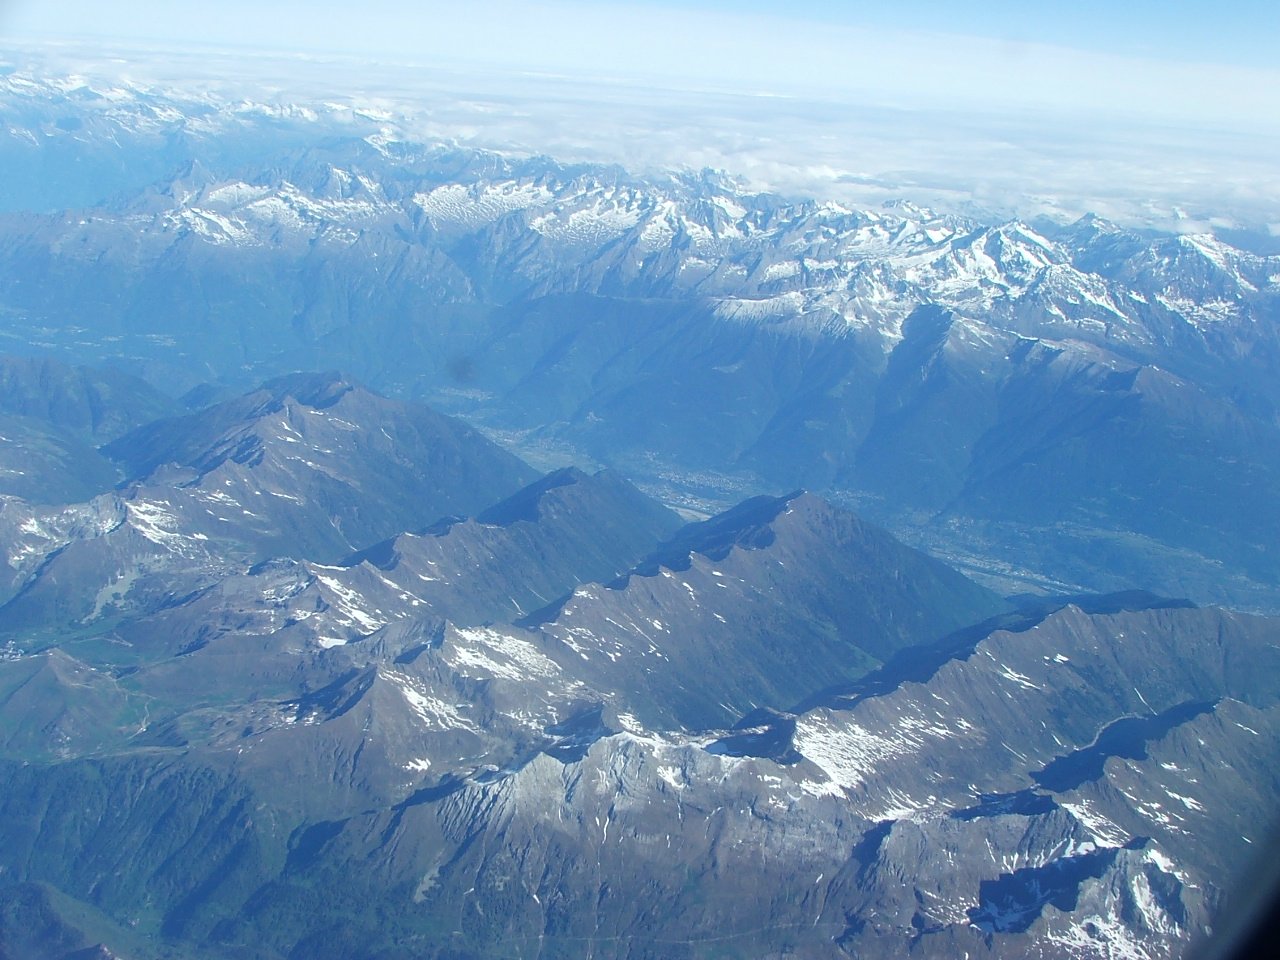 an aerial po taken from inside a plane shows the mountains